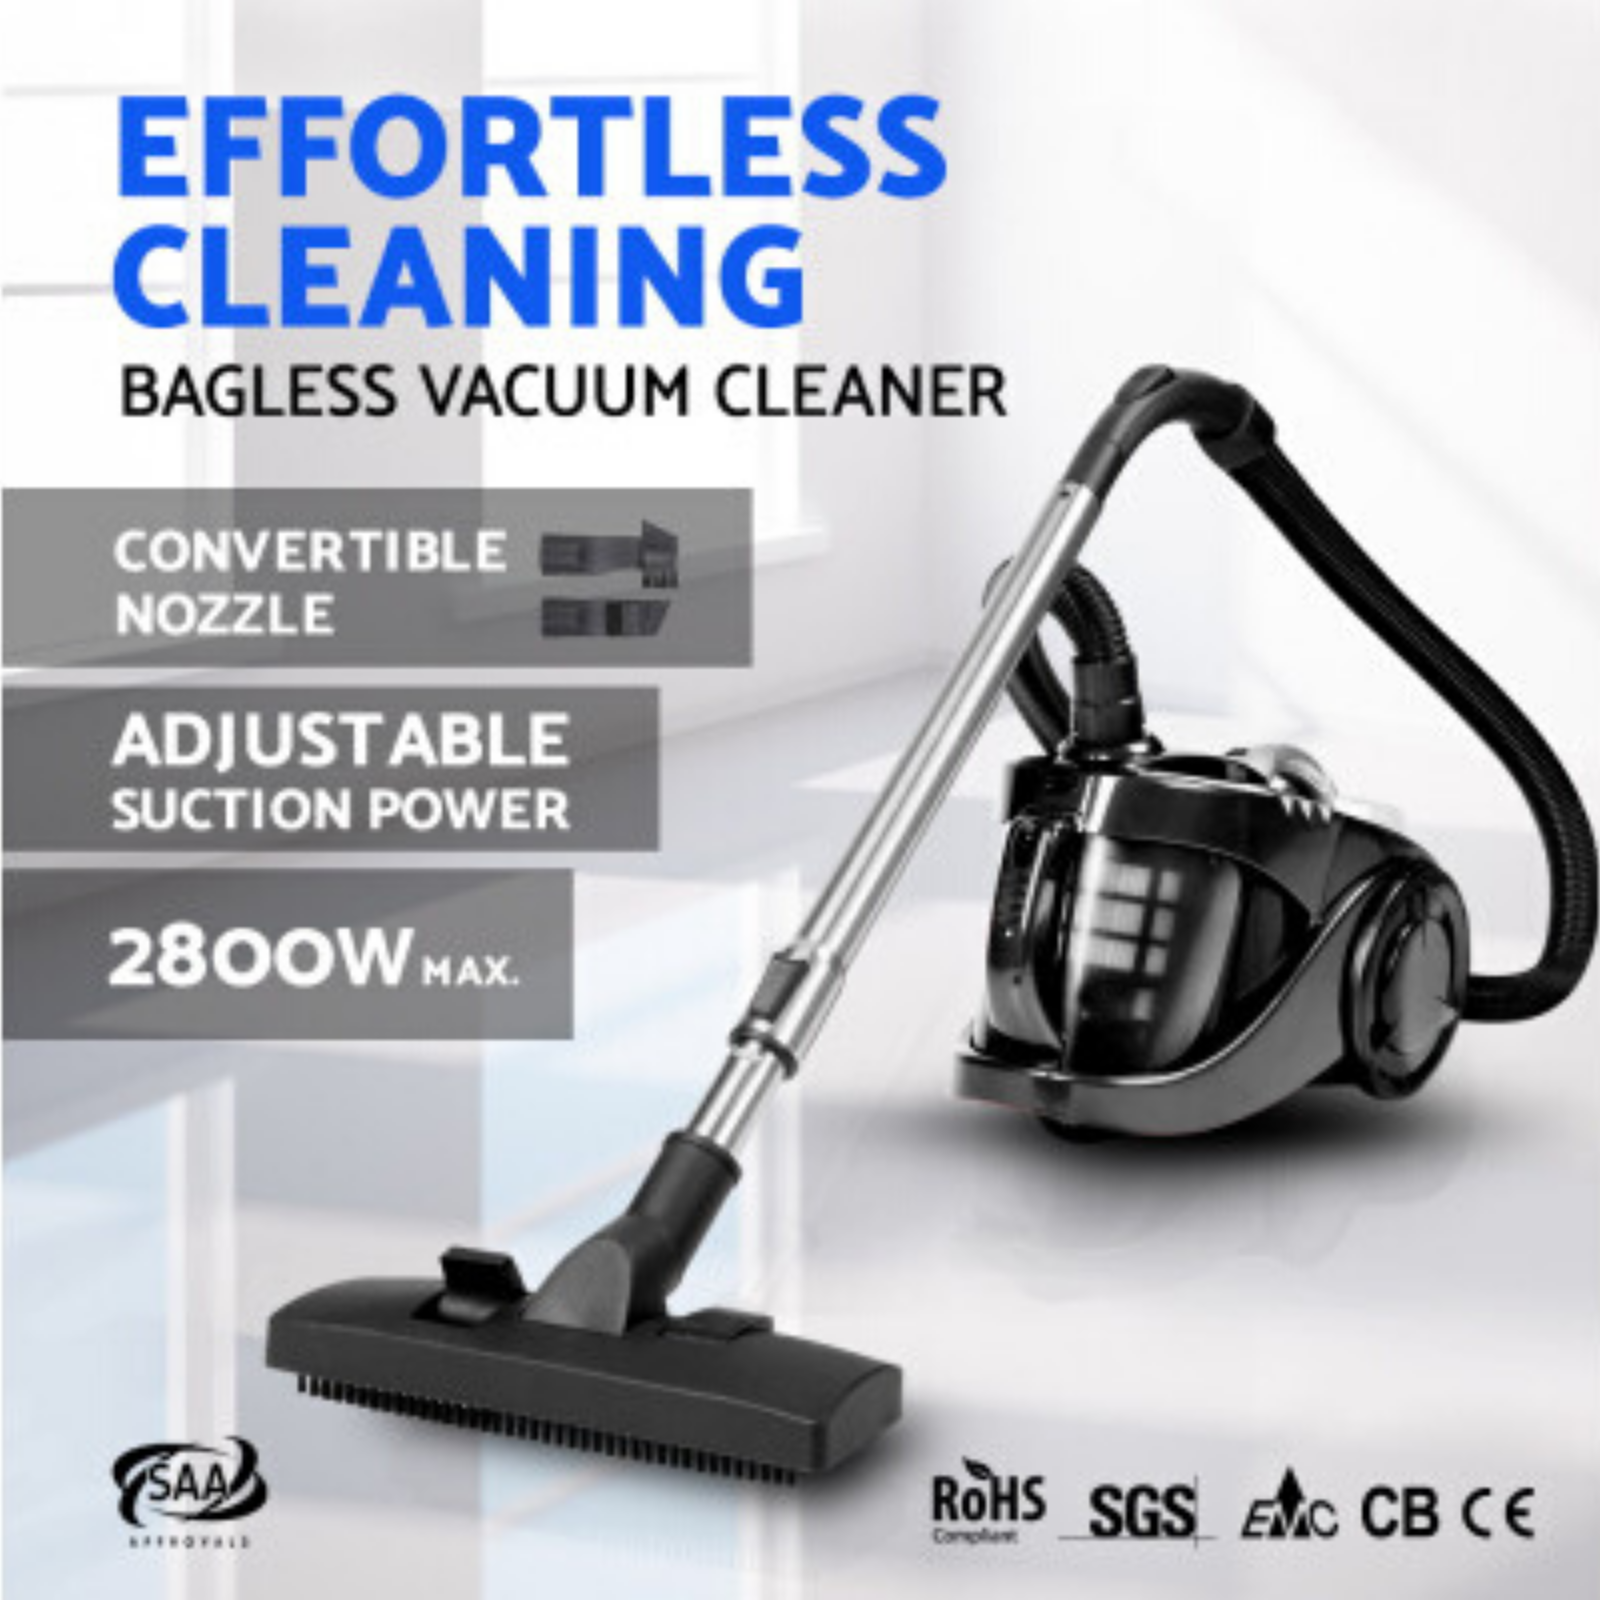 Bagless Vacuum Cleaner has effortless cleaning with convertible nozzle, adjustable suction power and maximum of 2800 Watts